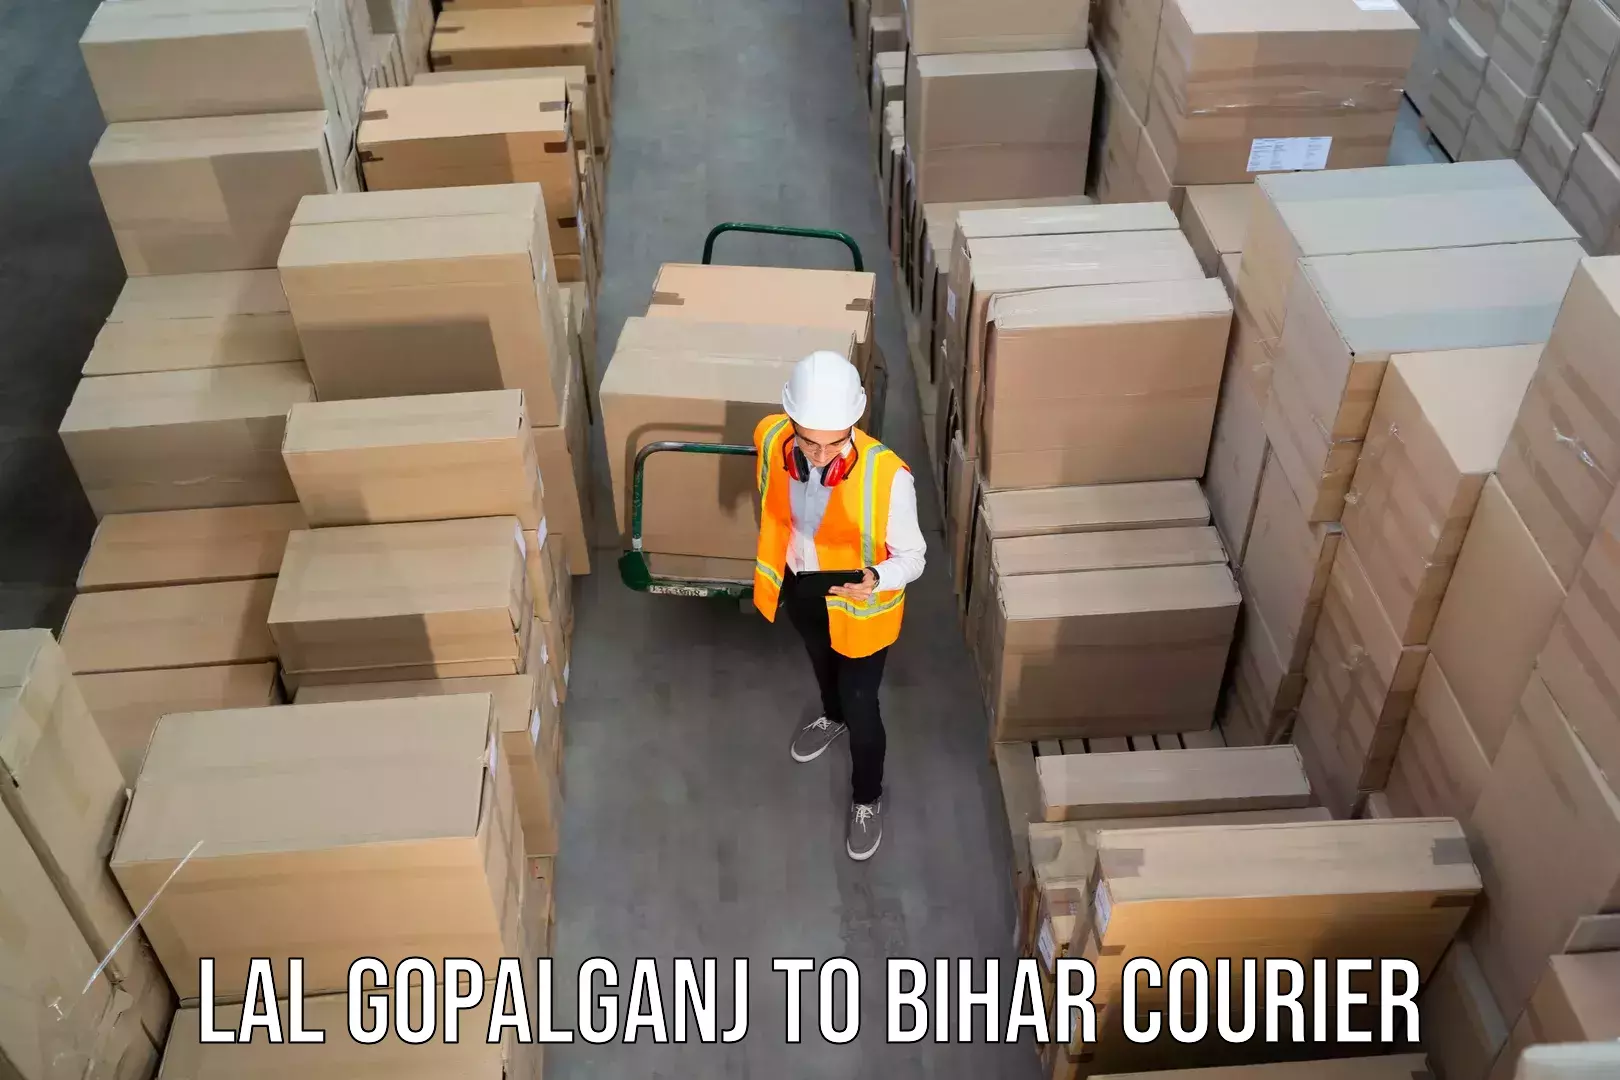 Reliable delivery network Lal Gopalganj to Baniapur